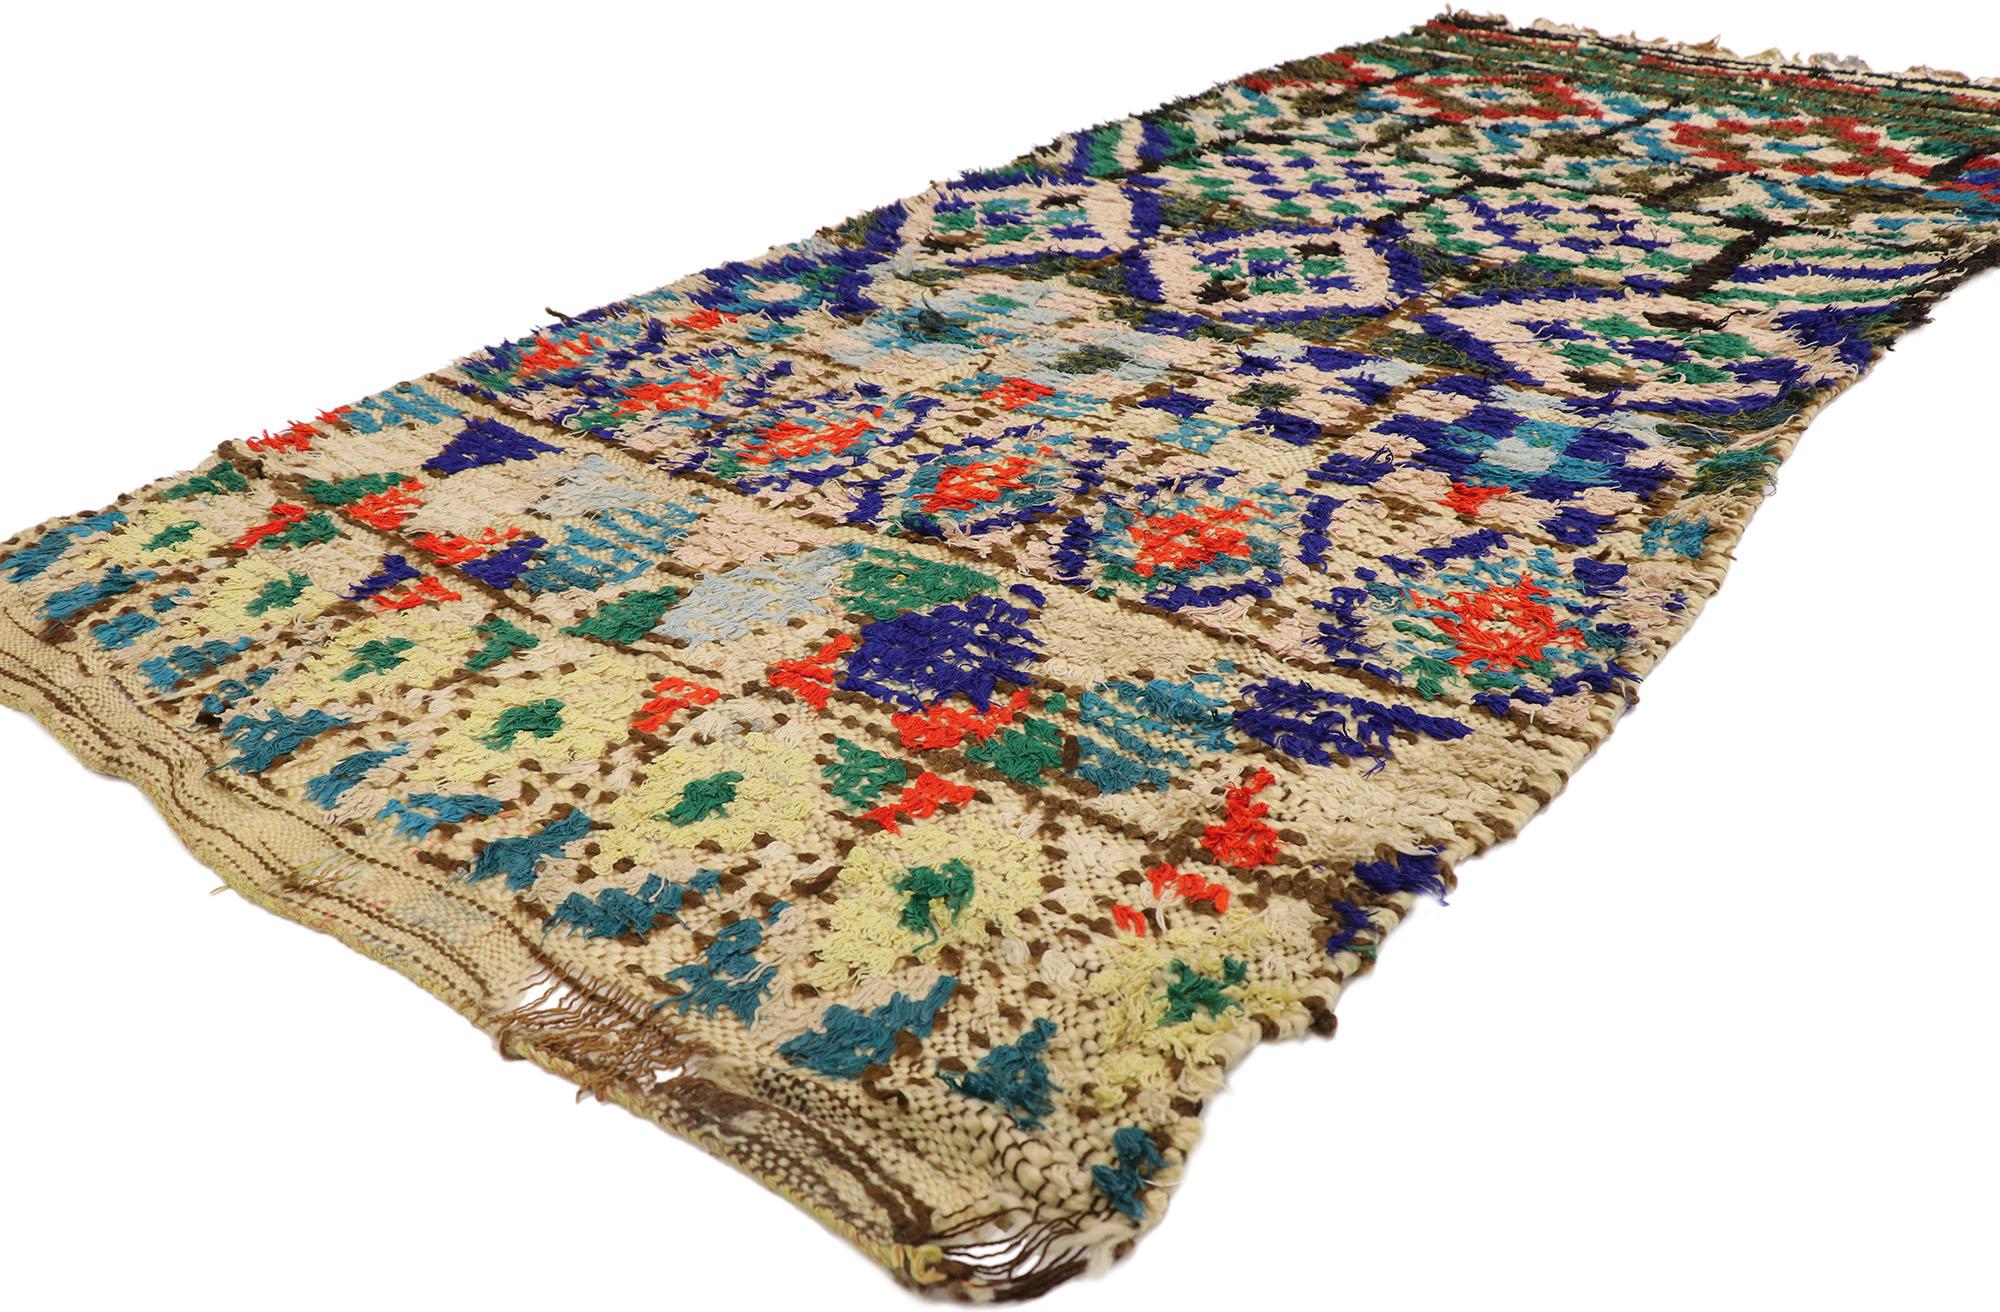 21557 Vintage Moroccan Azilal Rug, 03'07 x 08'00.
Gypset Boho meets rustic jungalow in this hand knotted wool vintage Berber Moroccan Azilal rug. The striking geometric design and bold color palette woven into this piece creating a layers of joy